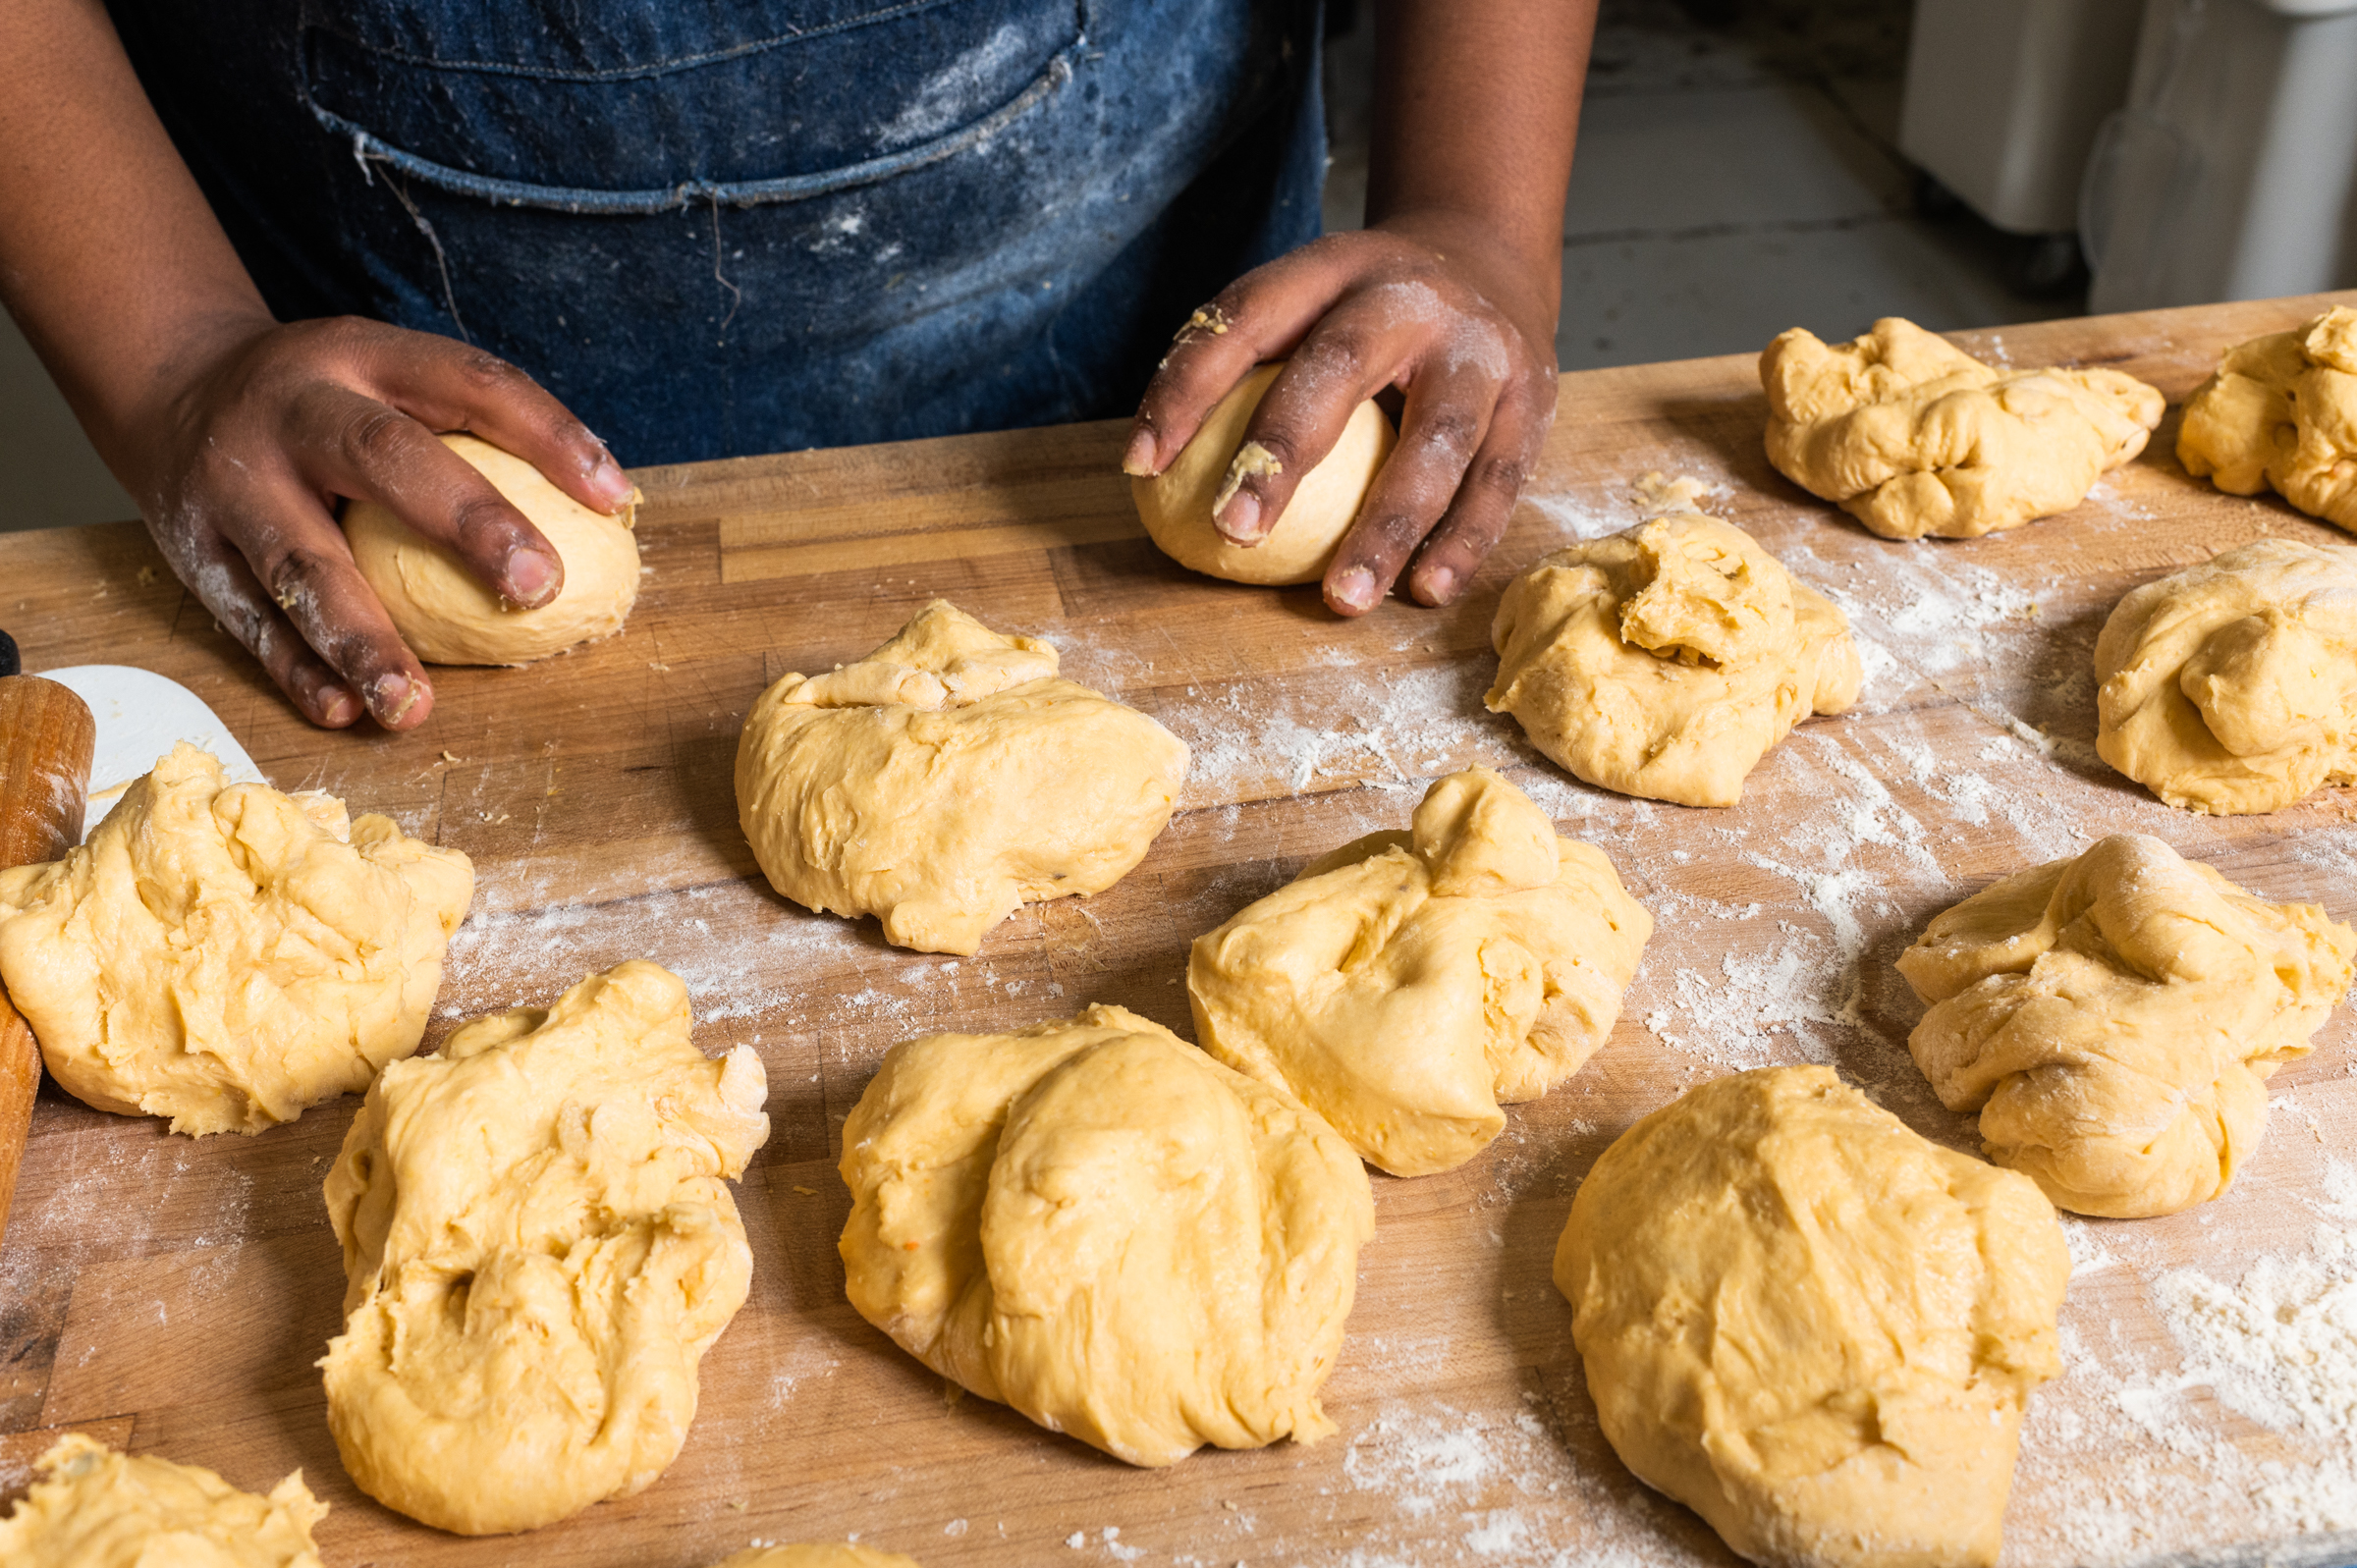 Once portioned, the dough is rolled into smooth balls